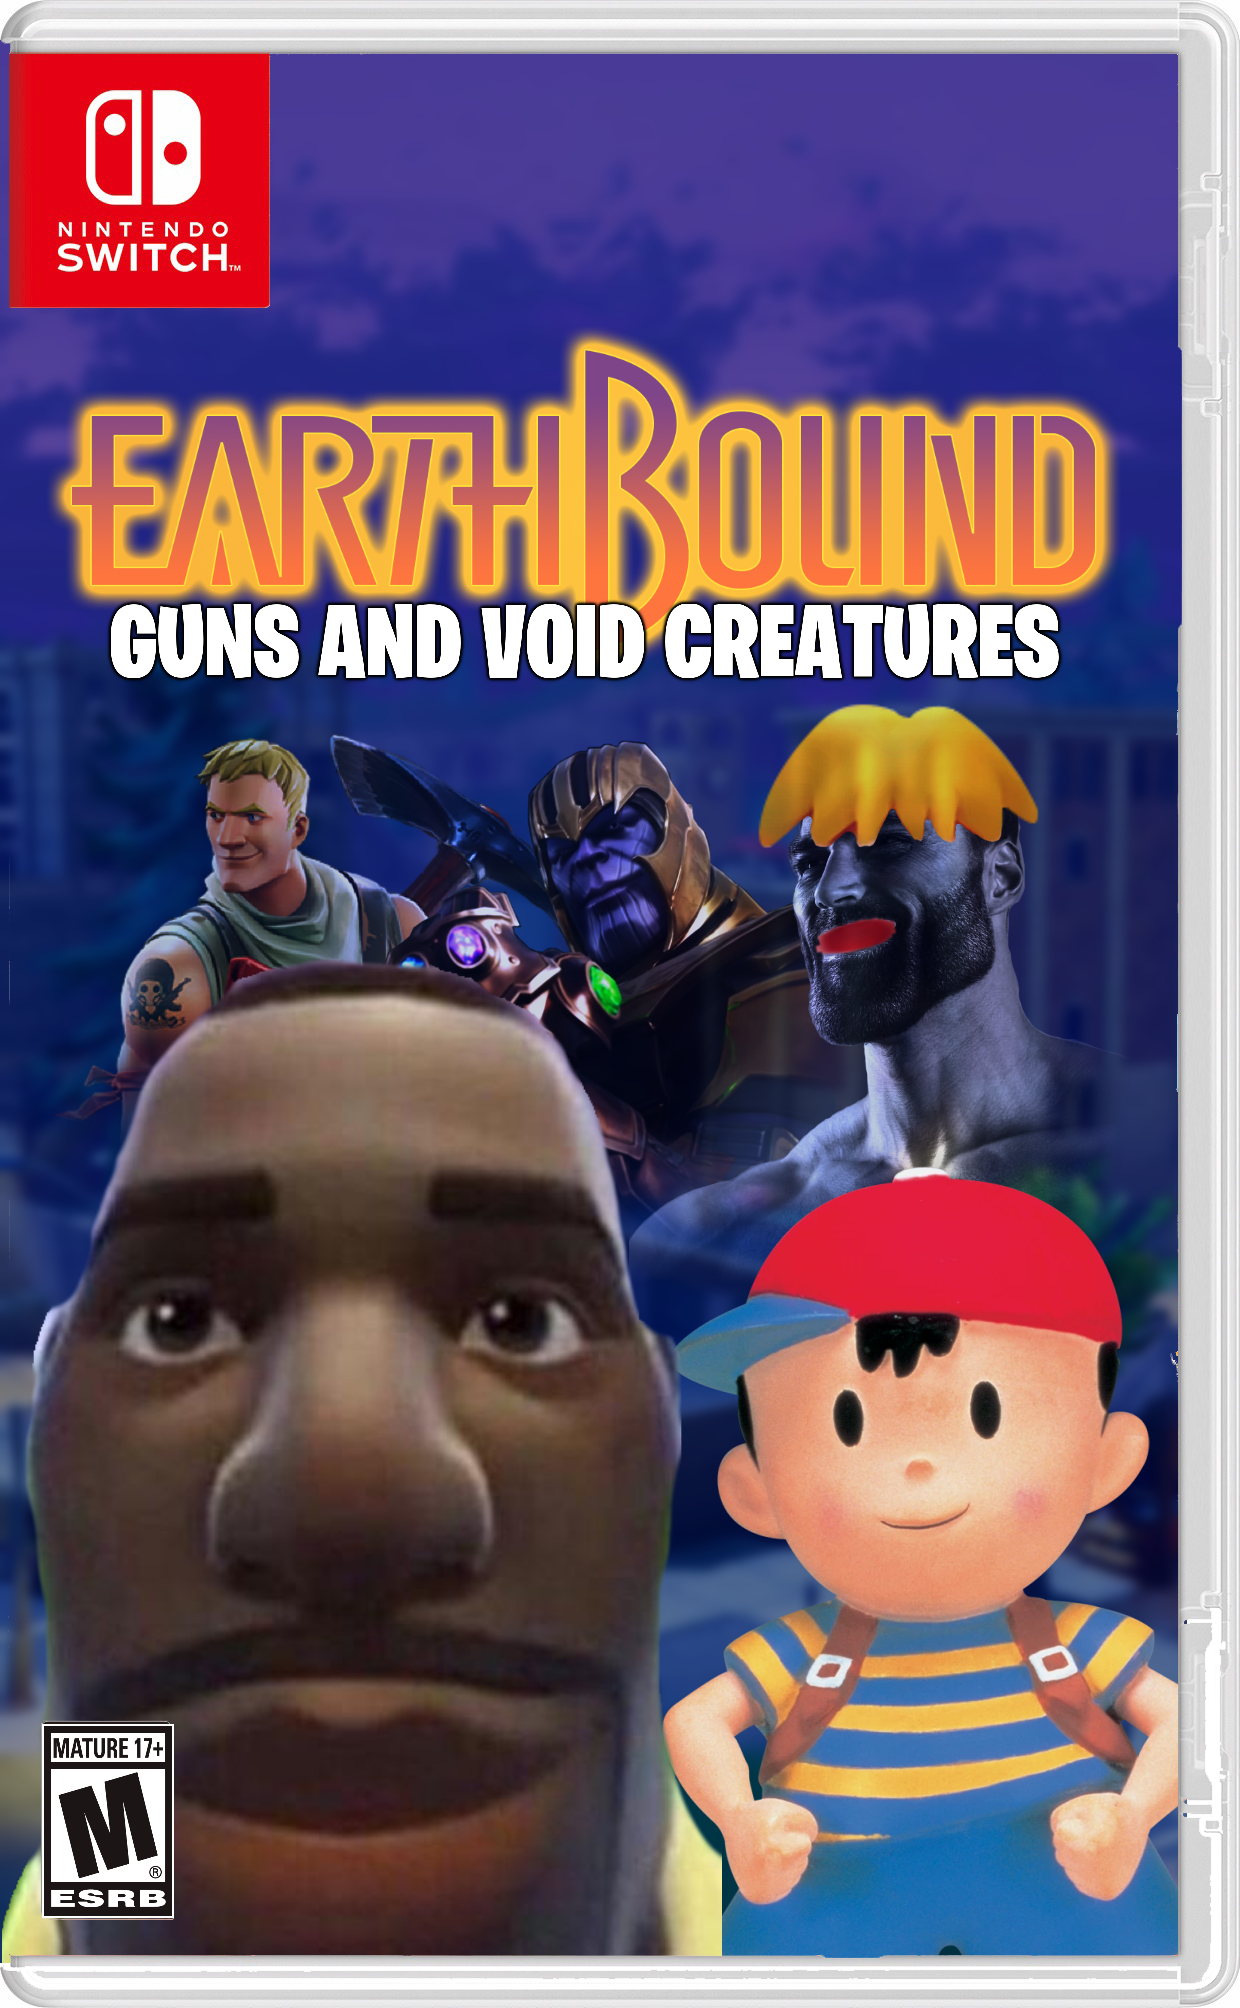 when is earthbound coming to switch